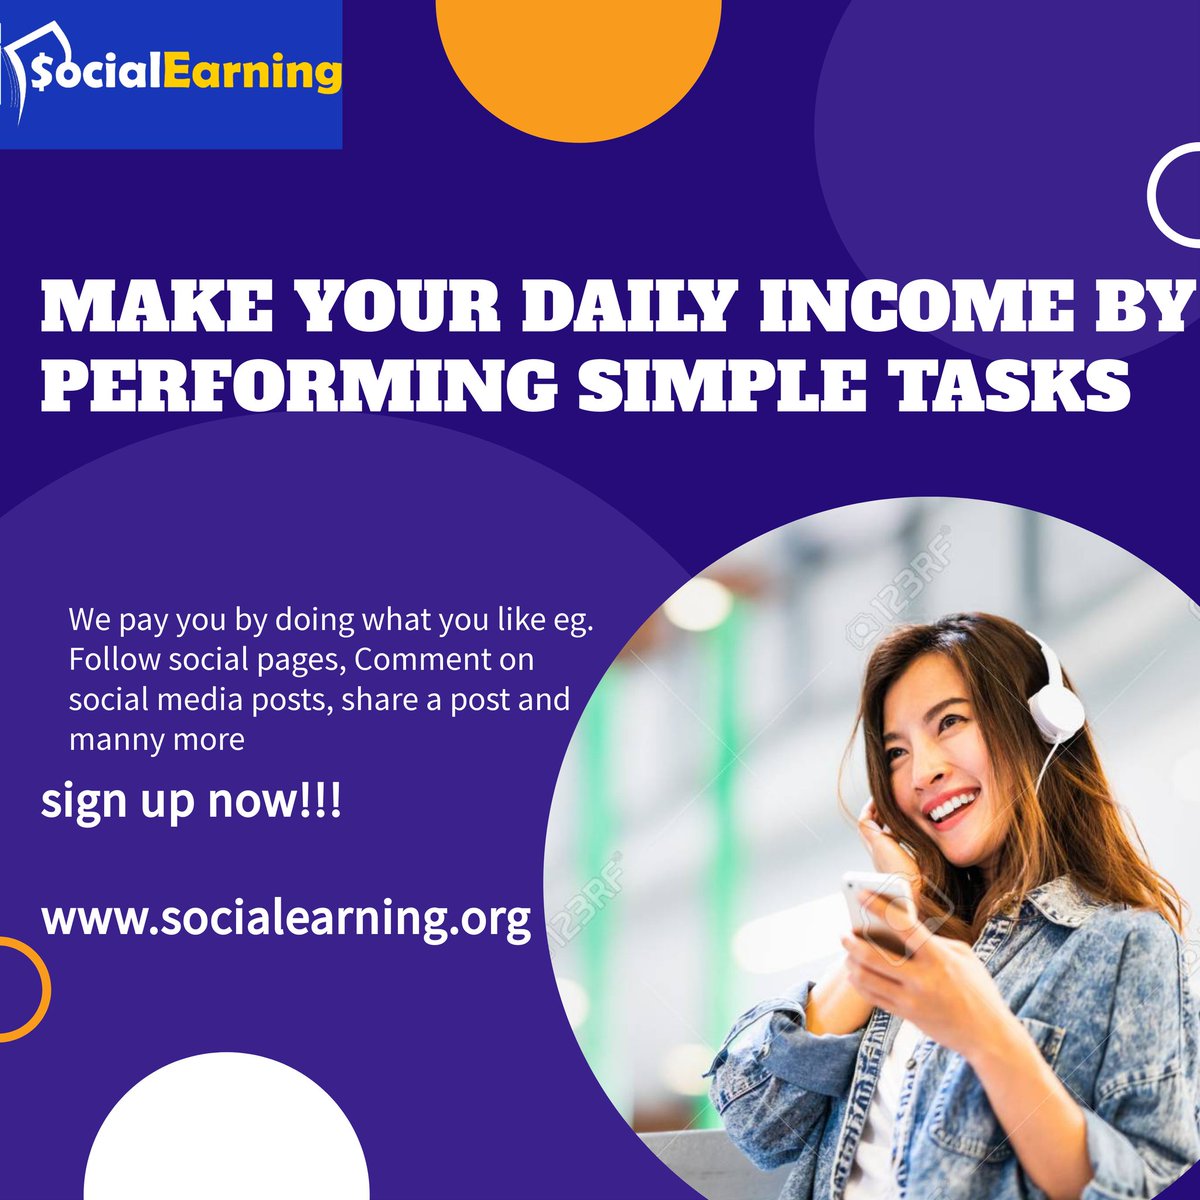 Make your daily income by doing what you like on our website socialearning.org #socialearning